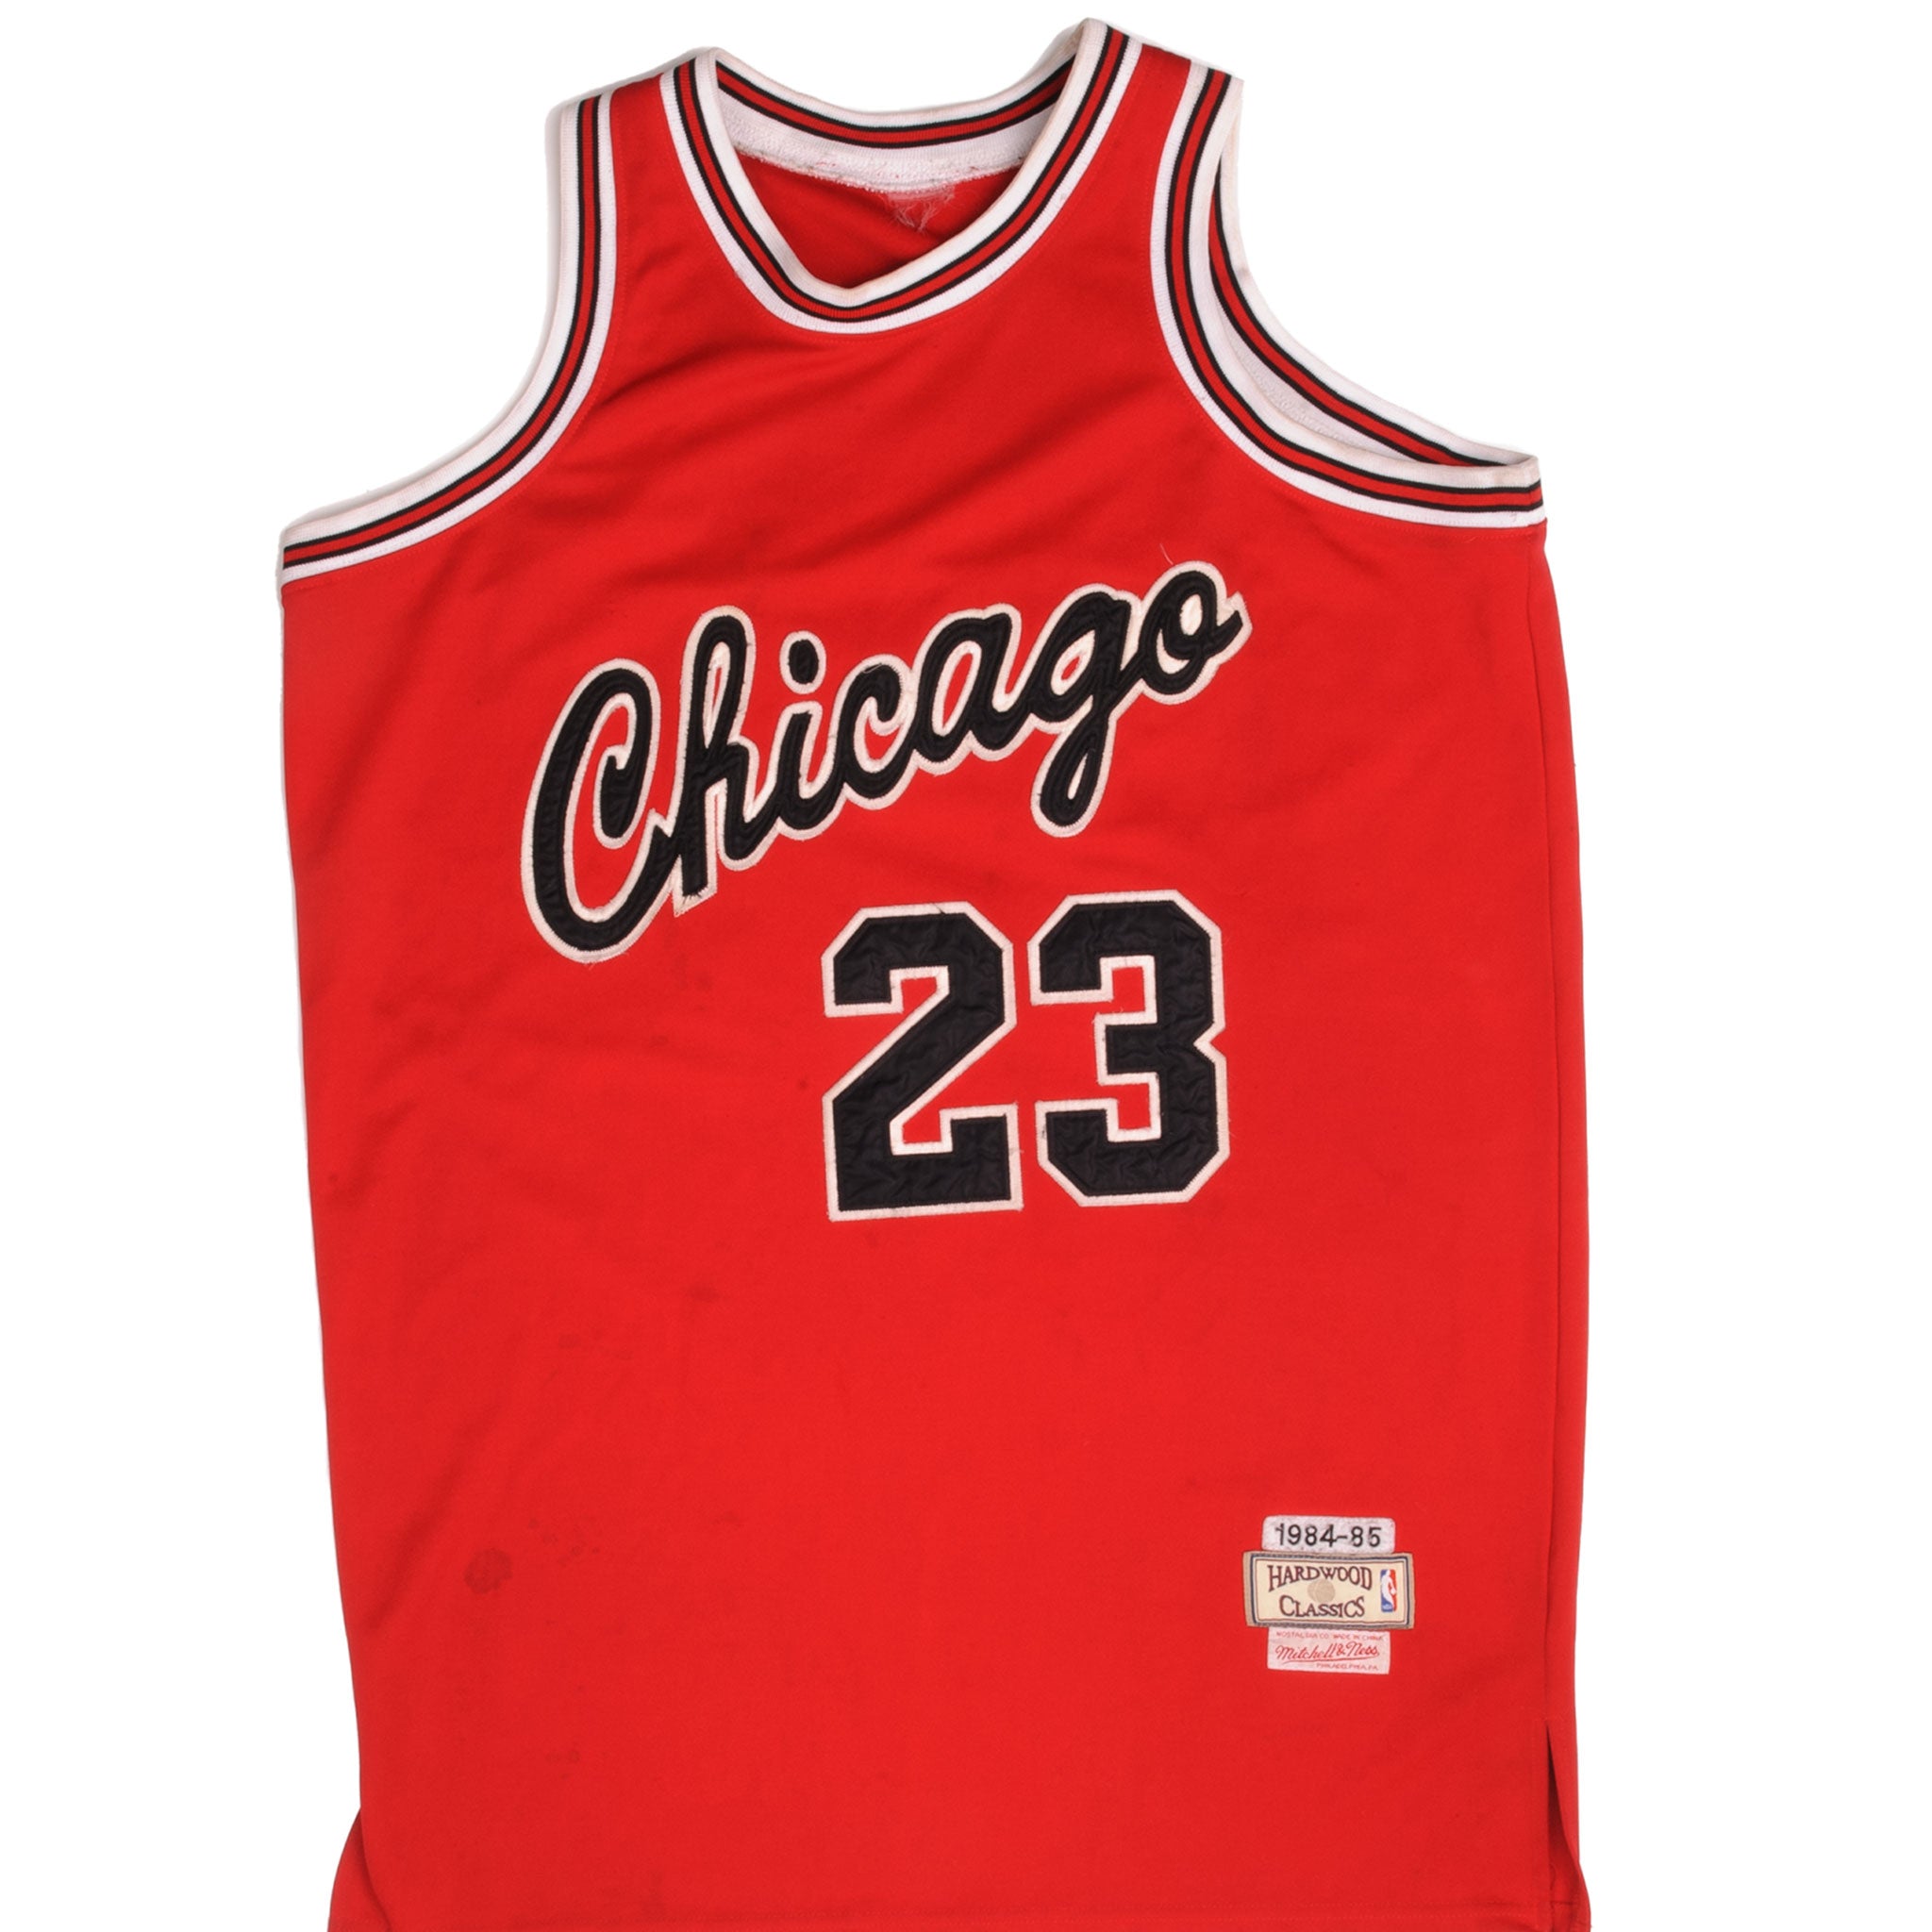 where can i buy a chicago bulls jersey